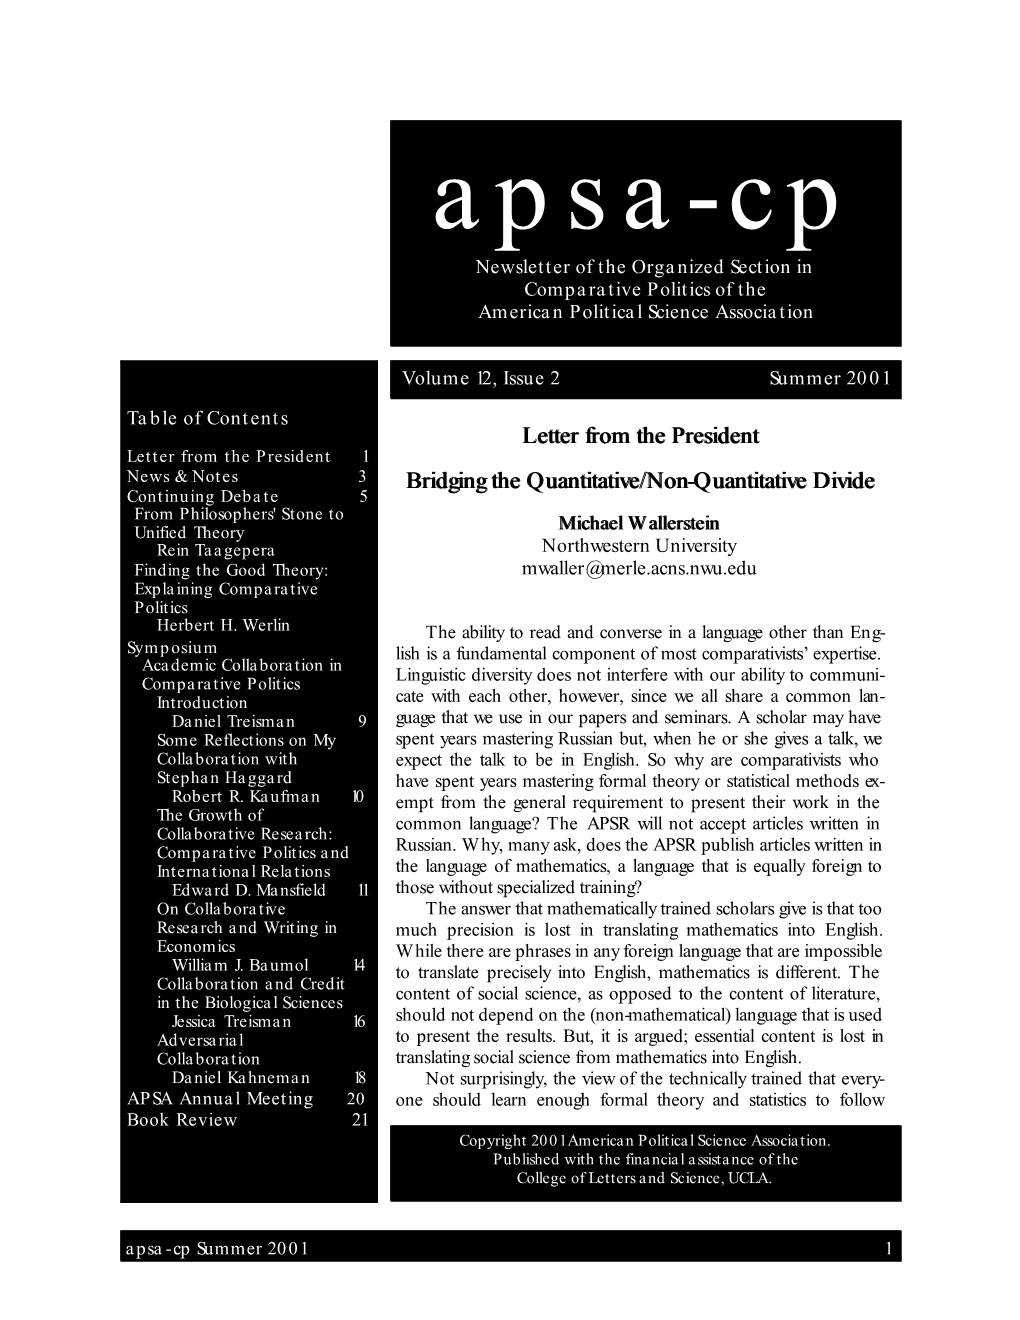 Apsa-Cp Newsletter of the Organized Section in Comparative Politics of the American Political Science Association